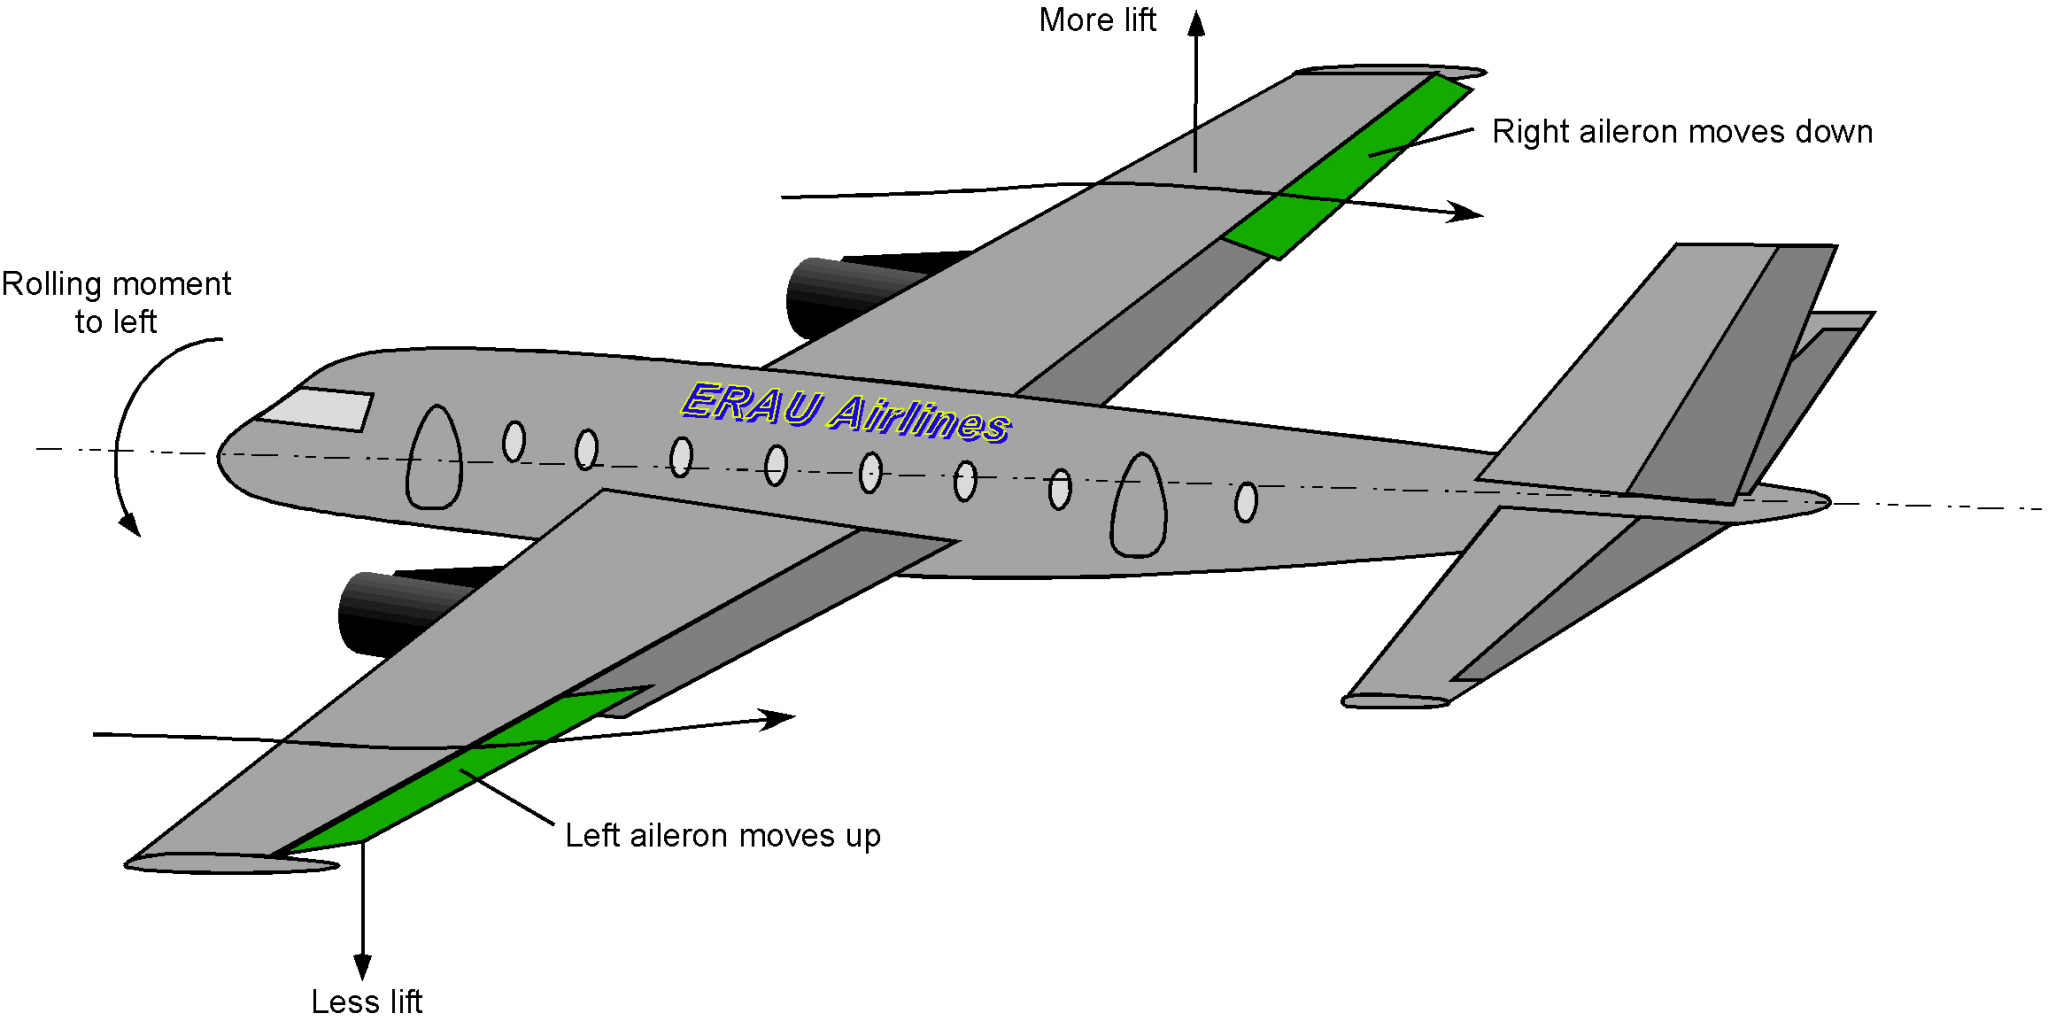 what is the differential aileron travel